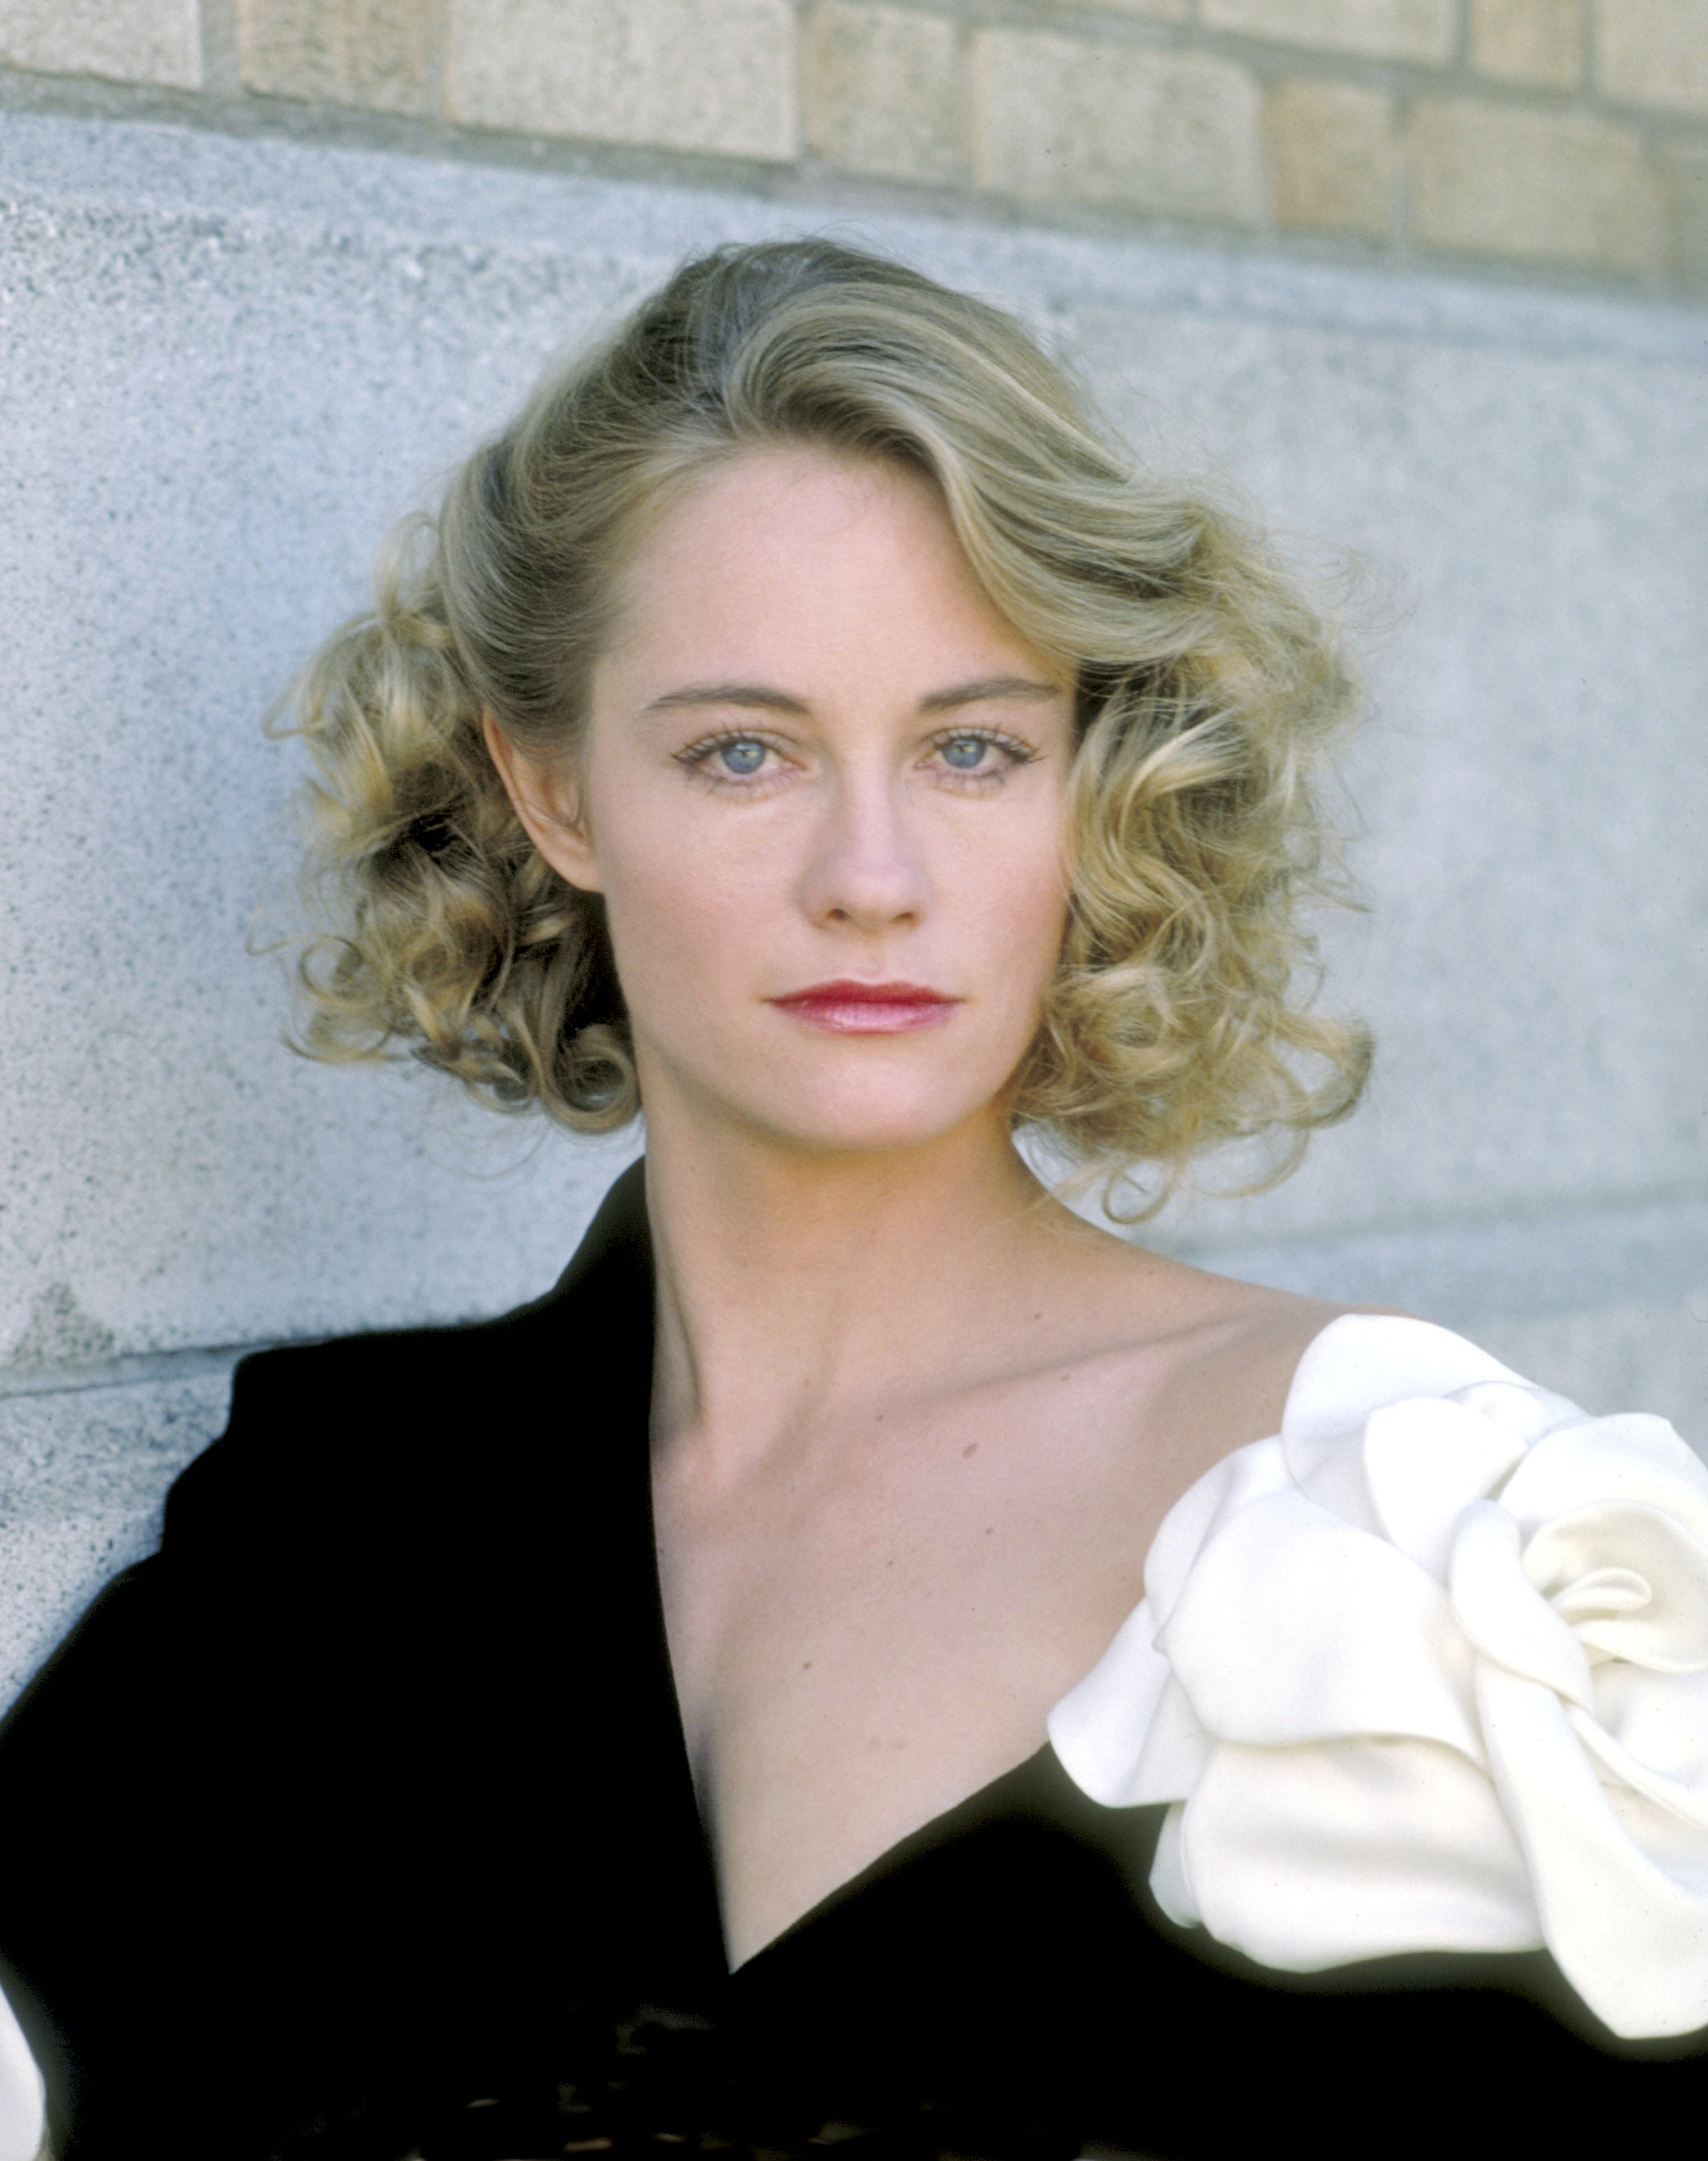 Cybill Shepherd as Maddie Hayes in the pilot season of ABC's "Moonlight" in 1985. | Source: Getty Images